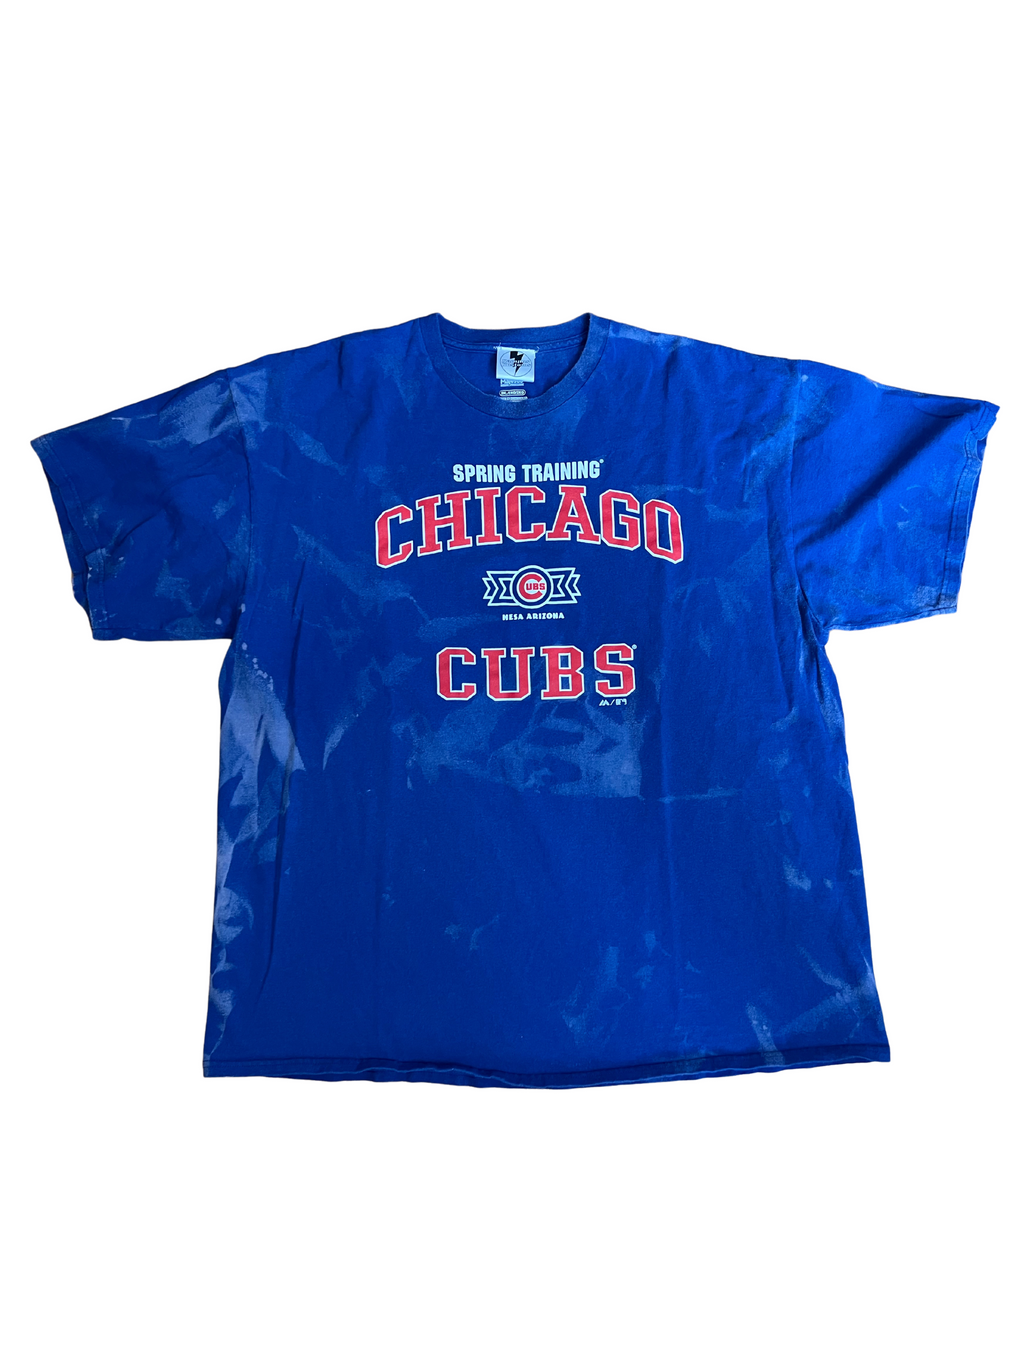 Chicago Cubs Spring Training Bleached Shirt